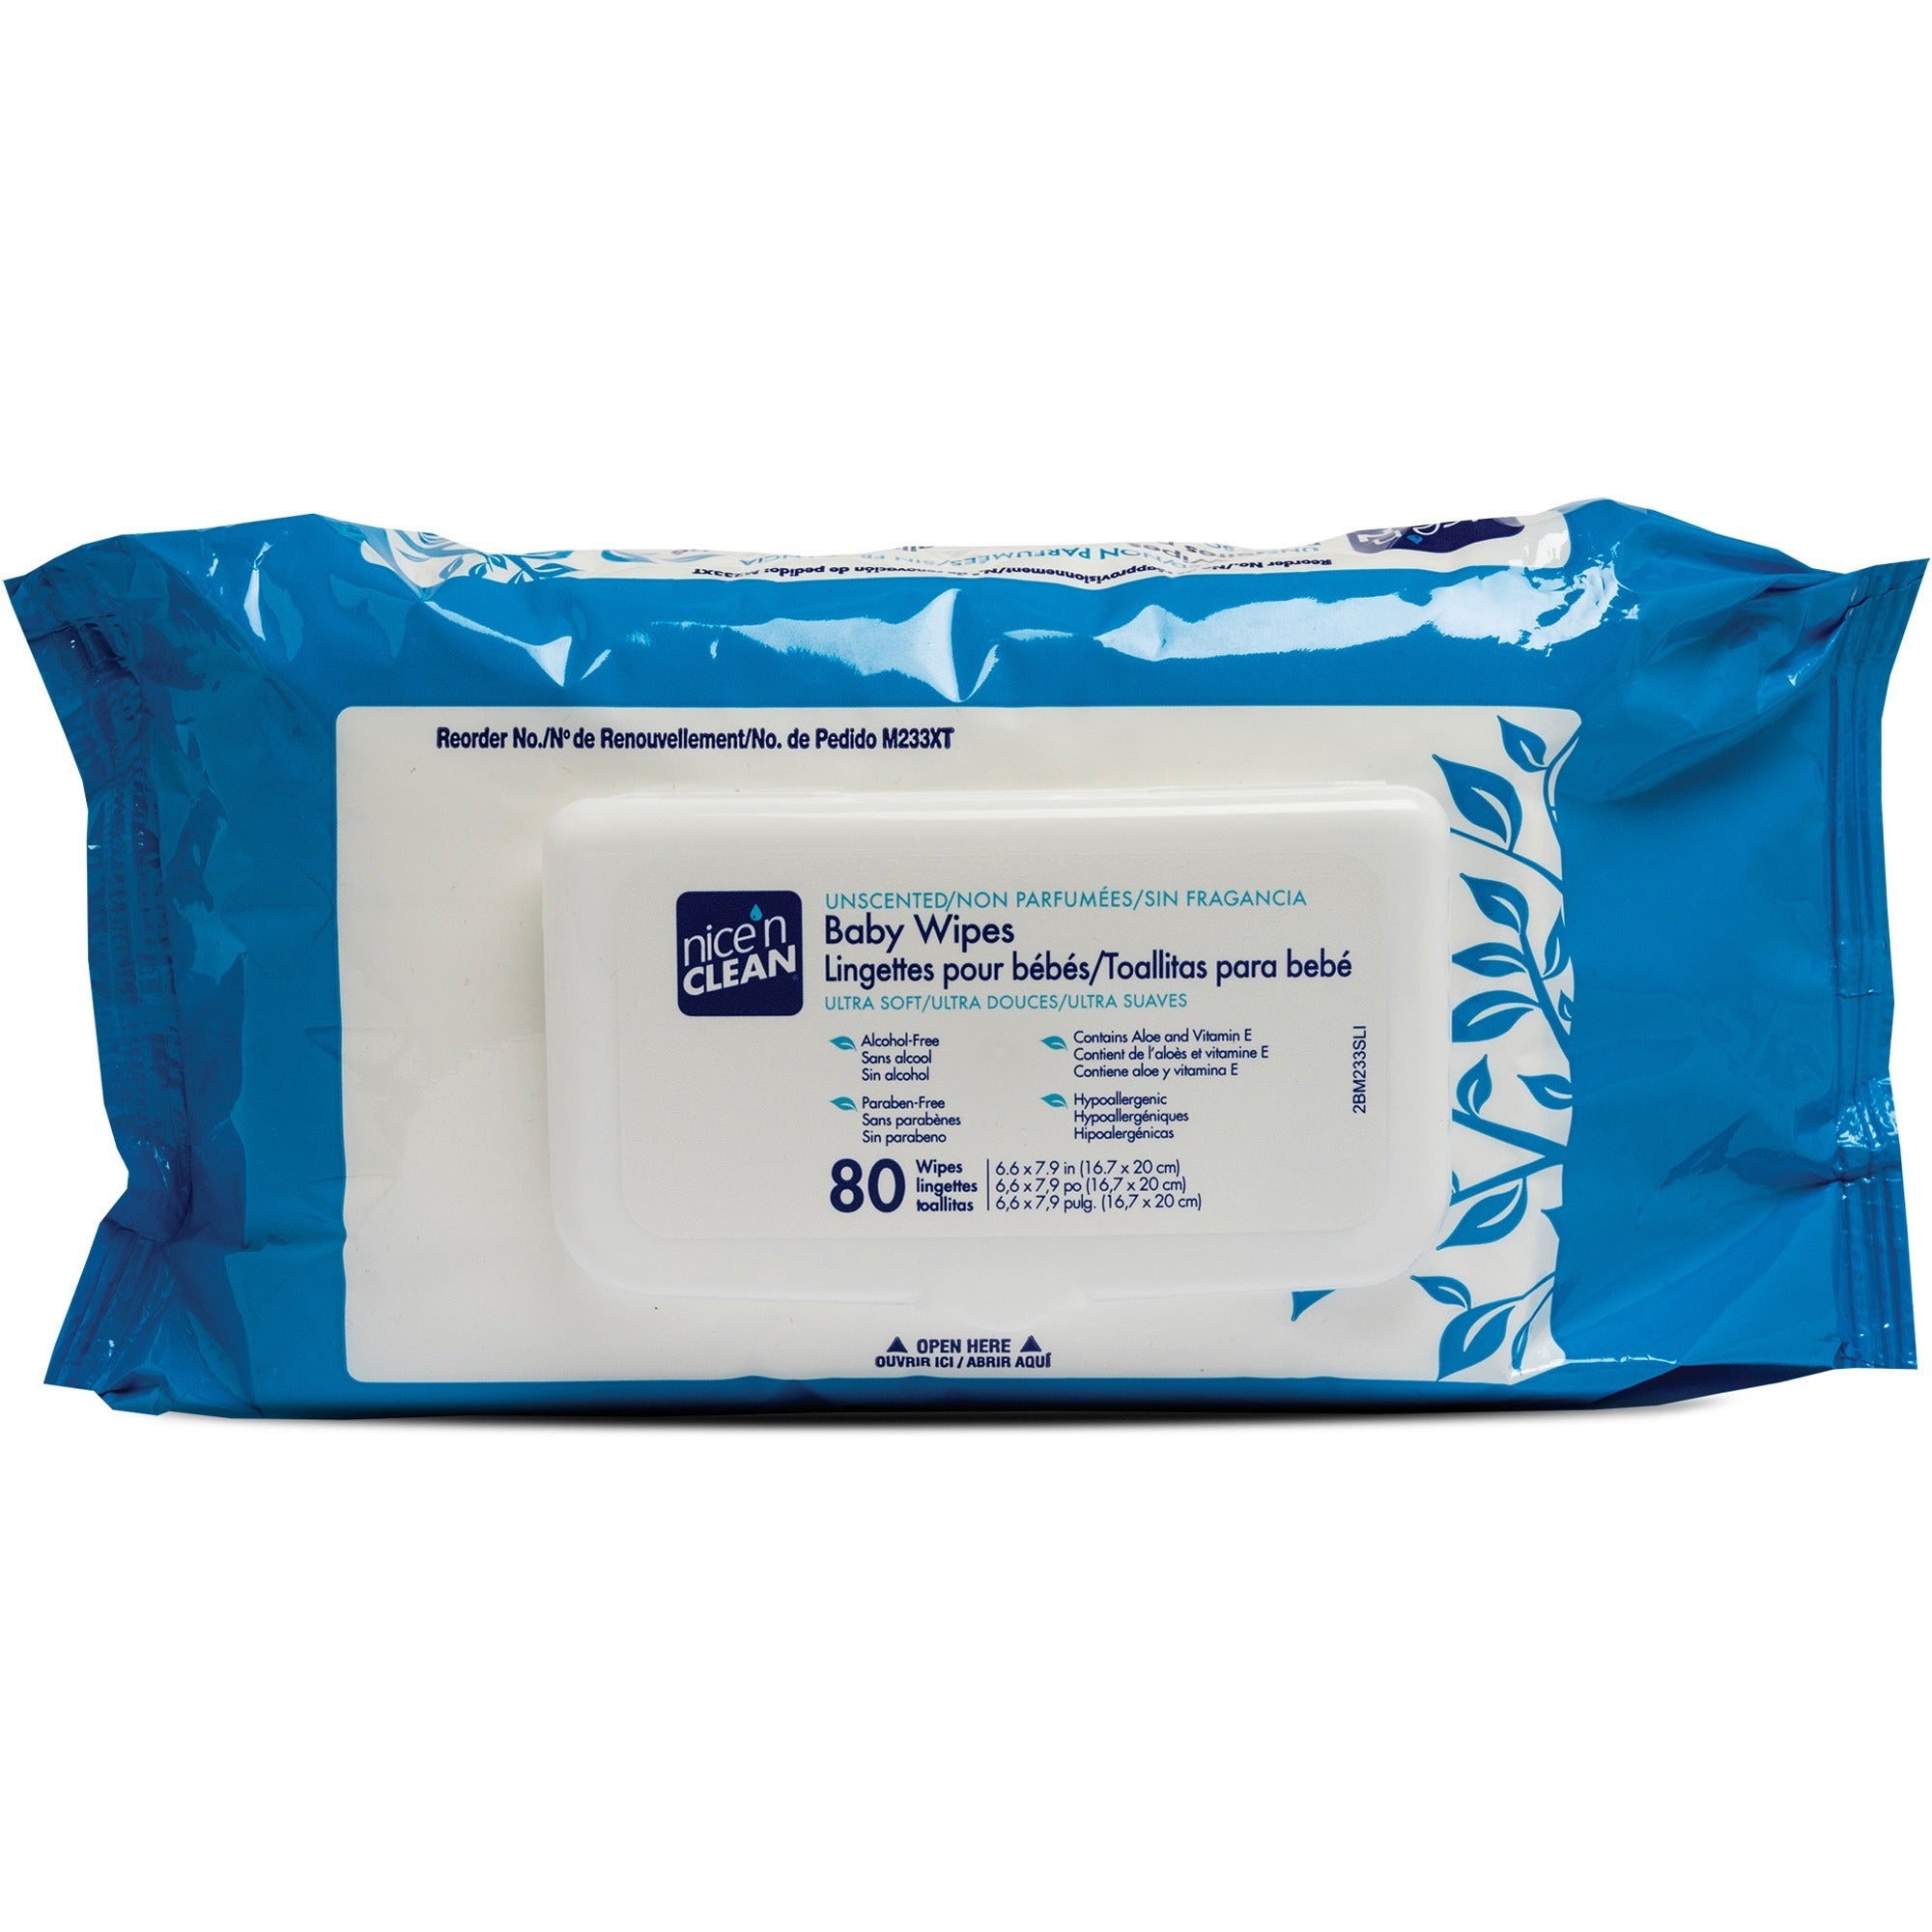 PDI Nice'n Clean Baby Wipes - 7.90" x 6.60" - Blue - Paraben-free, Latex-free, Resealable, Alcohol-free, Hypoallergenic, Moist - For Skin - 80 Per Pack